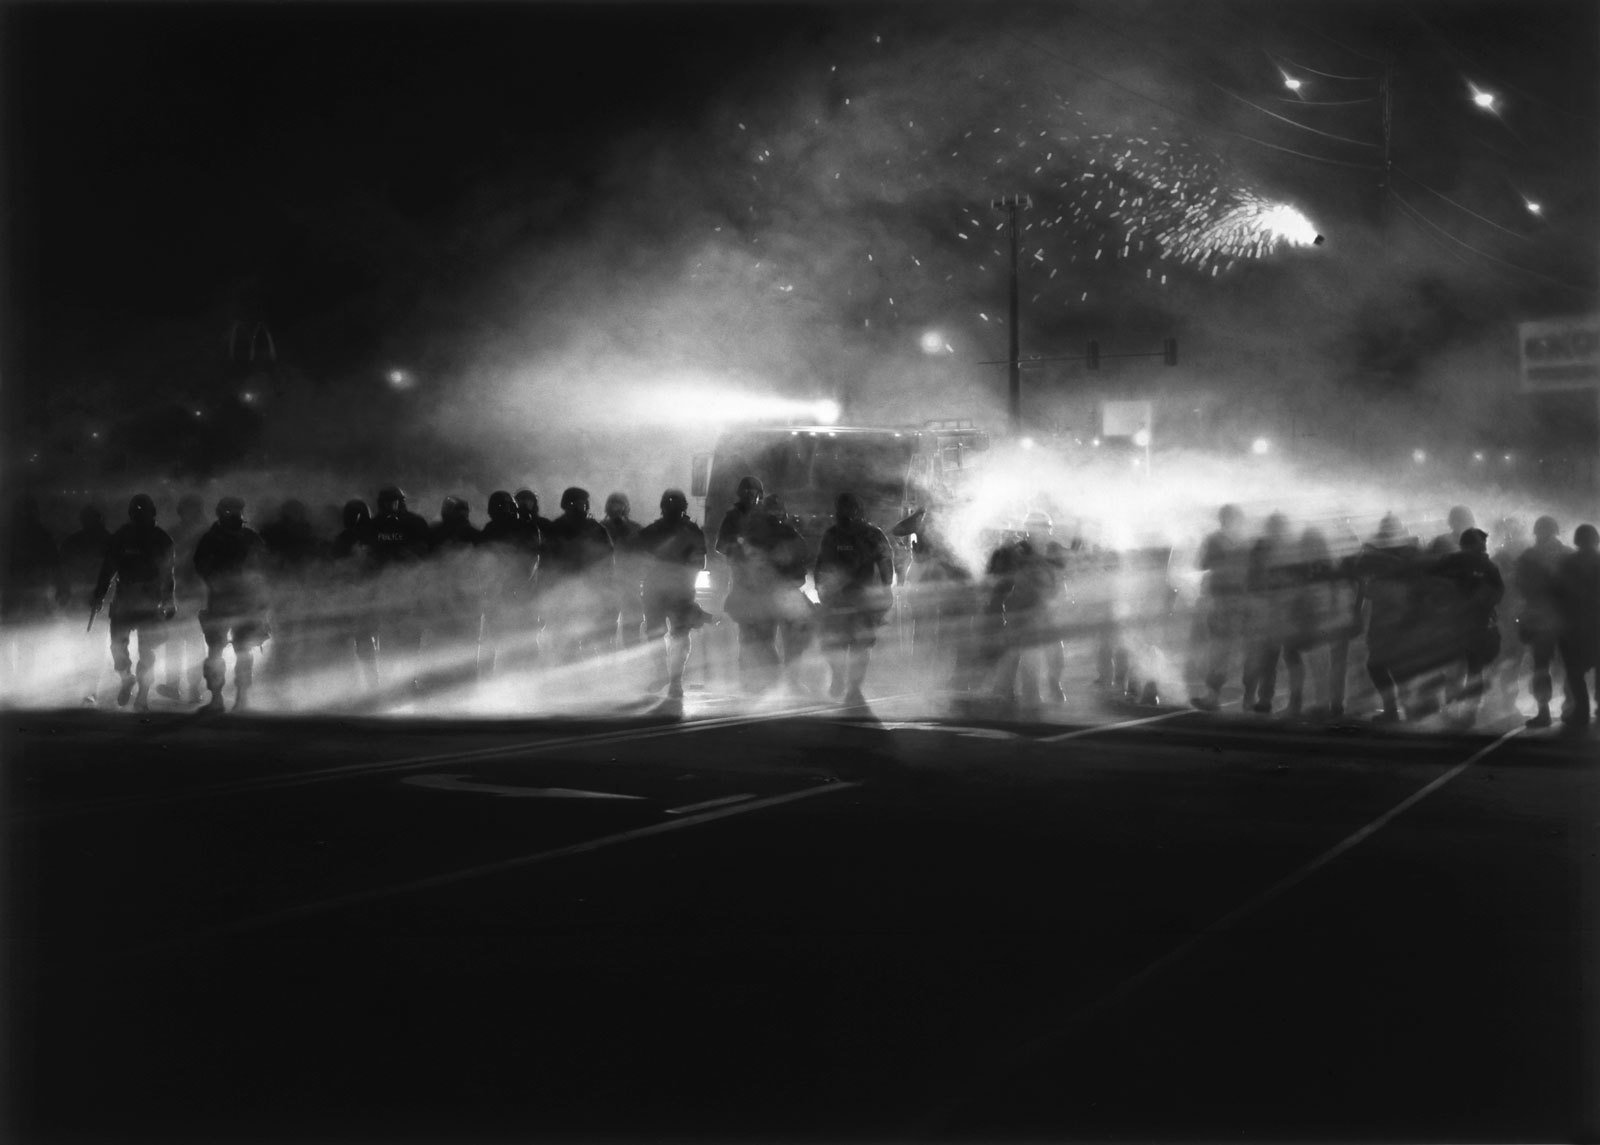 Untitled (Ferguson Police, August 13,&nbsp;2014), 2014.&nbsp;Charcoal on mounted&nbsp;paper, 86 x 120 inches (218.4 x 304.8&nbsp;cm).&nbsp;Courtesy of the artist; Metro&nbsp;Pictures, New York; Petzel, New York.&nbsp;Collection of The Broad Art Foundation.